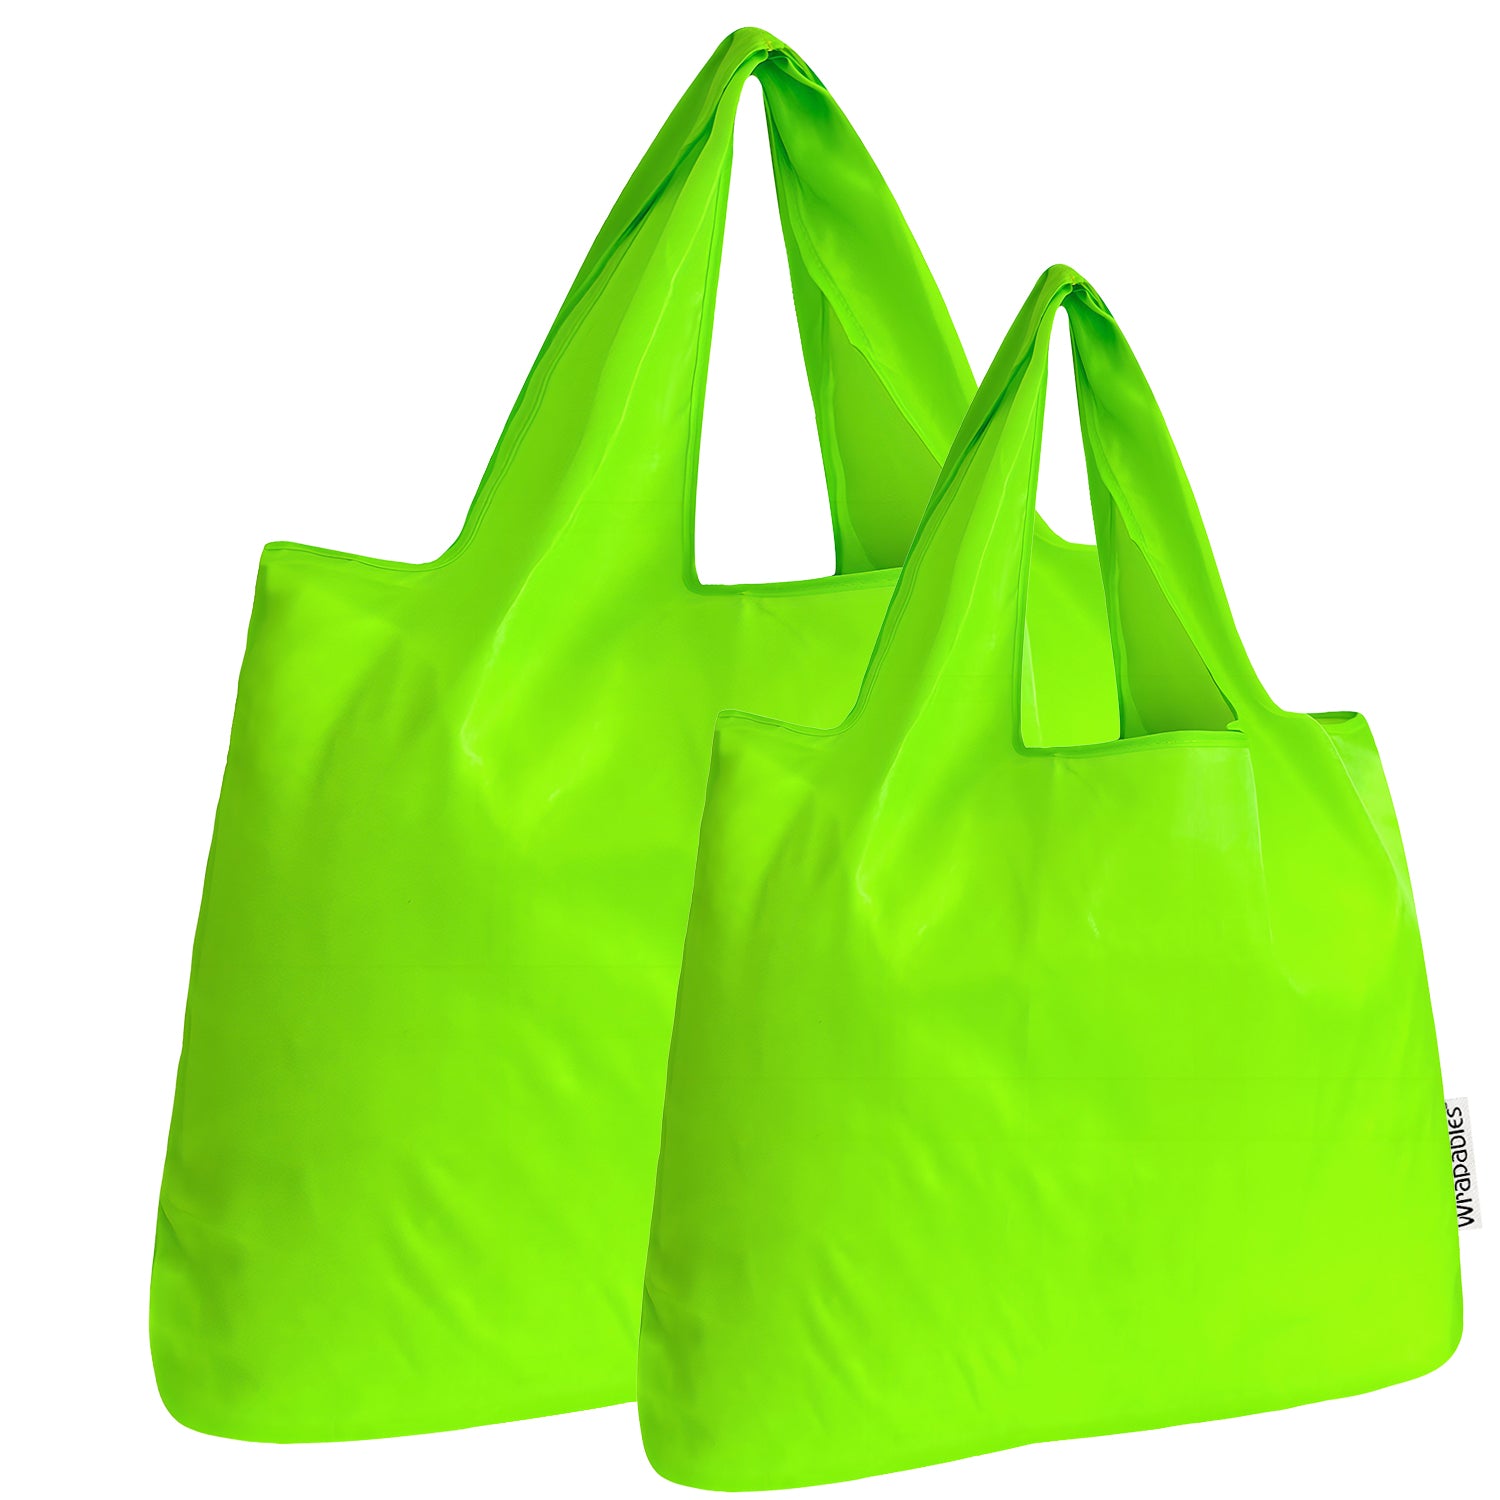 Wrapables Large & Small Foldable Tote Nylon Reusable Grocery Bags, Set of 2, Lime, Women's, Green